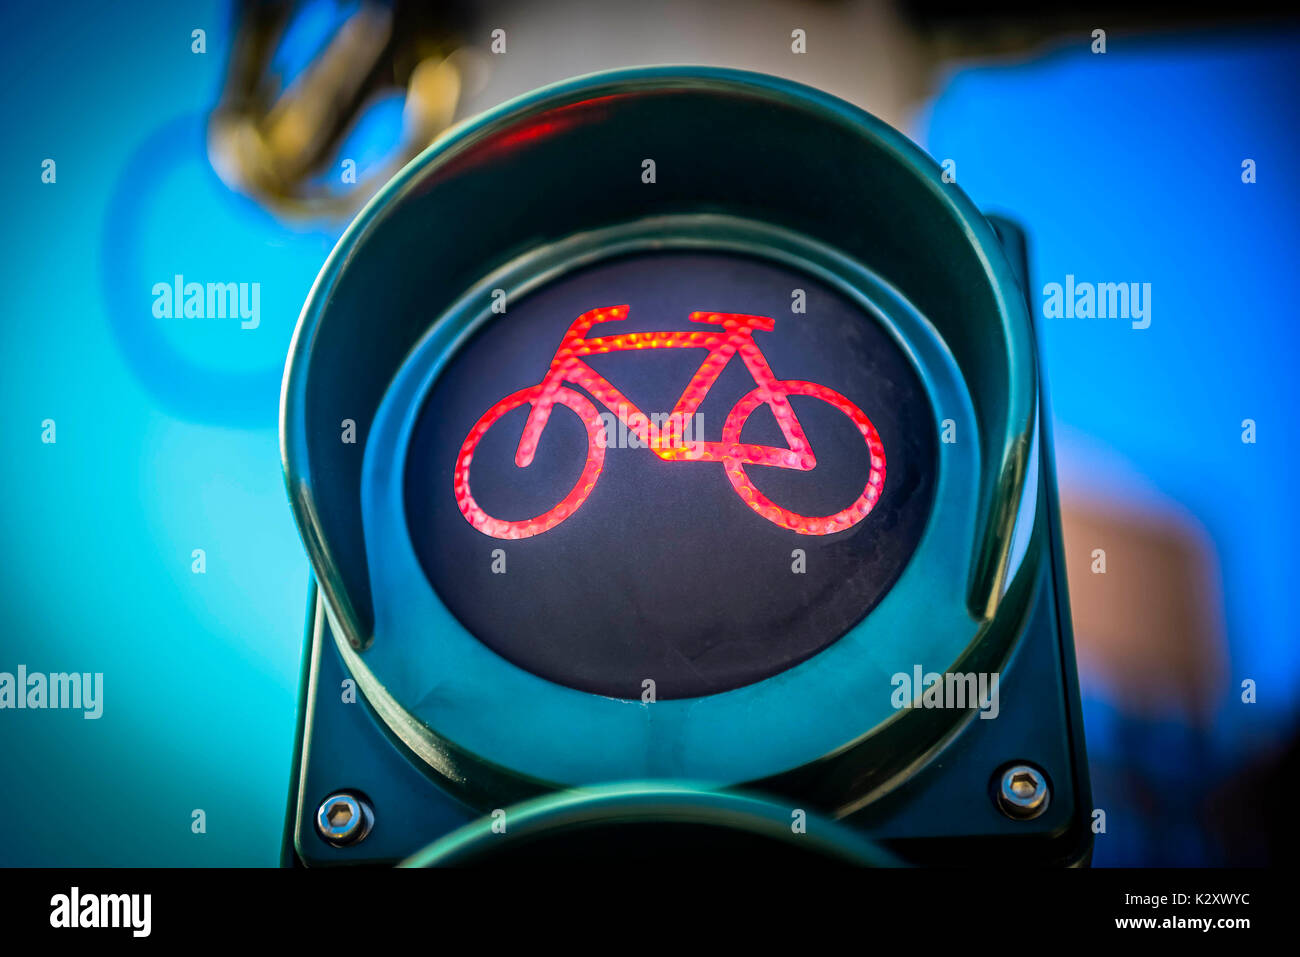 Red light for cyclists, Rotlicht fuer Fahrradfahrer Stock Photo